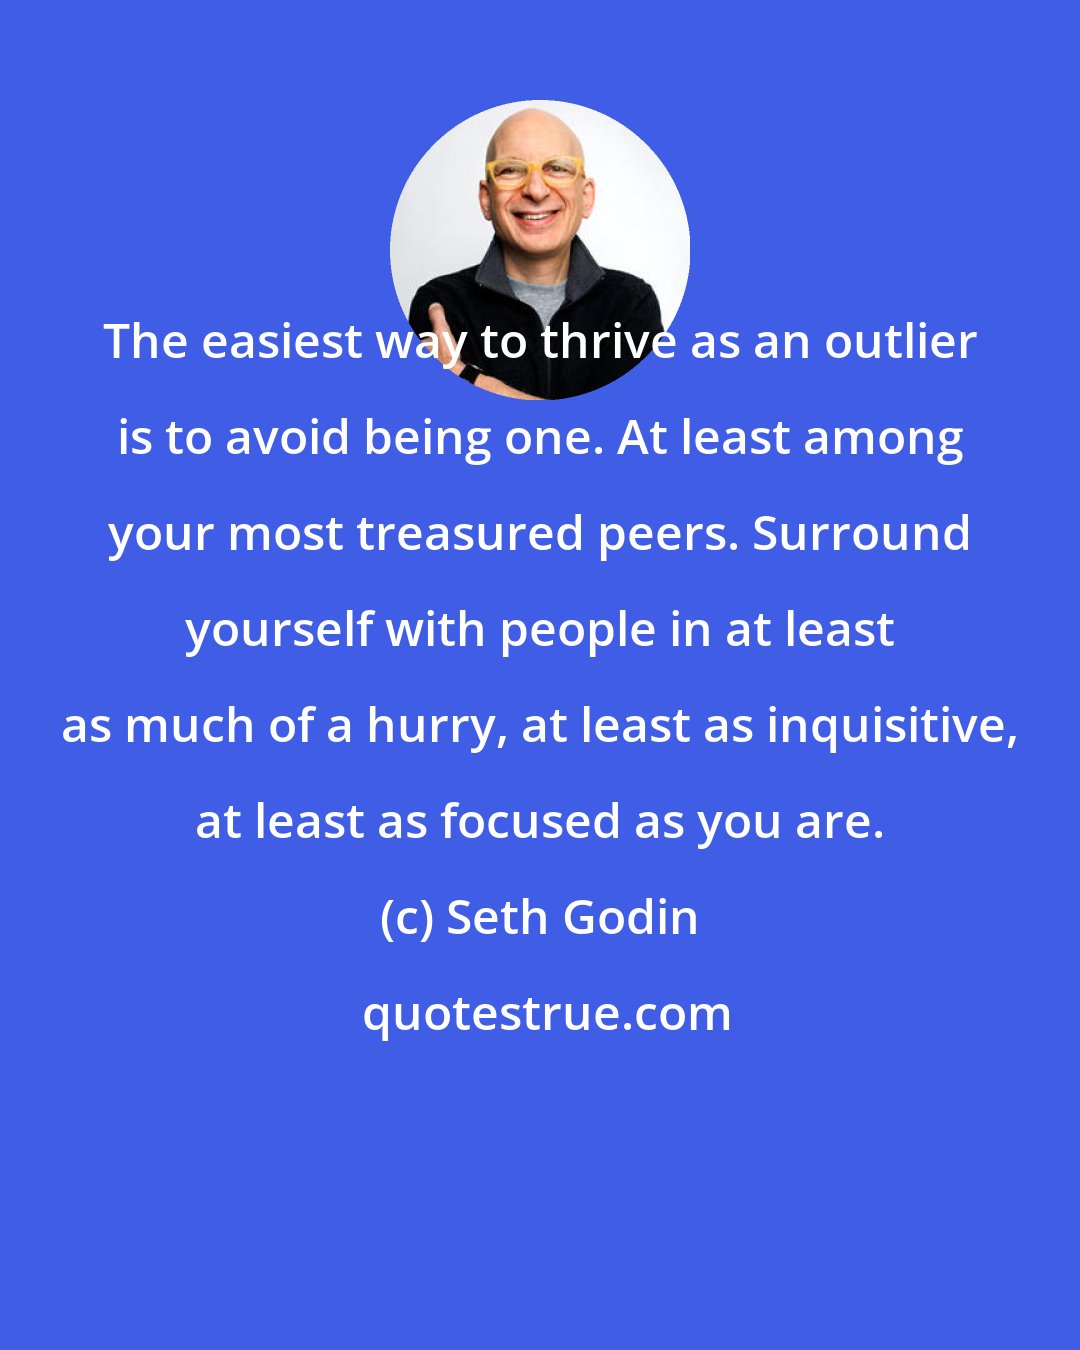 Seth Godin: The easiest way to thrive as an outlier is to avoid being one. At least among your most treasured peers. Surround yourself with people in at least as much of a hurry, at least as inquisitive, at least as focused as you are.